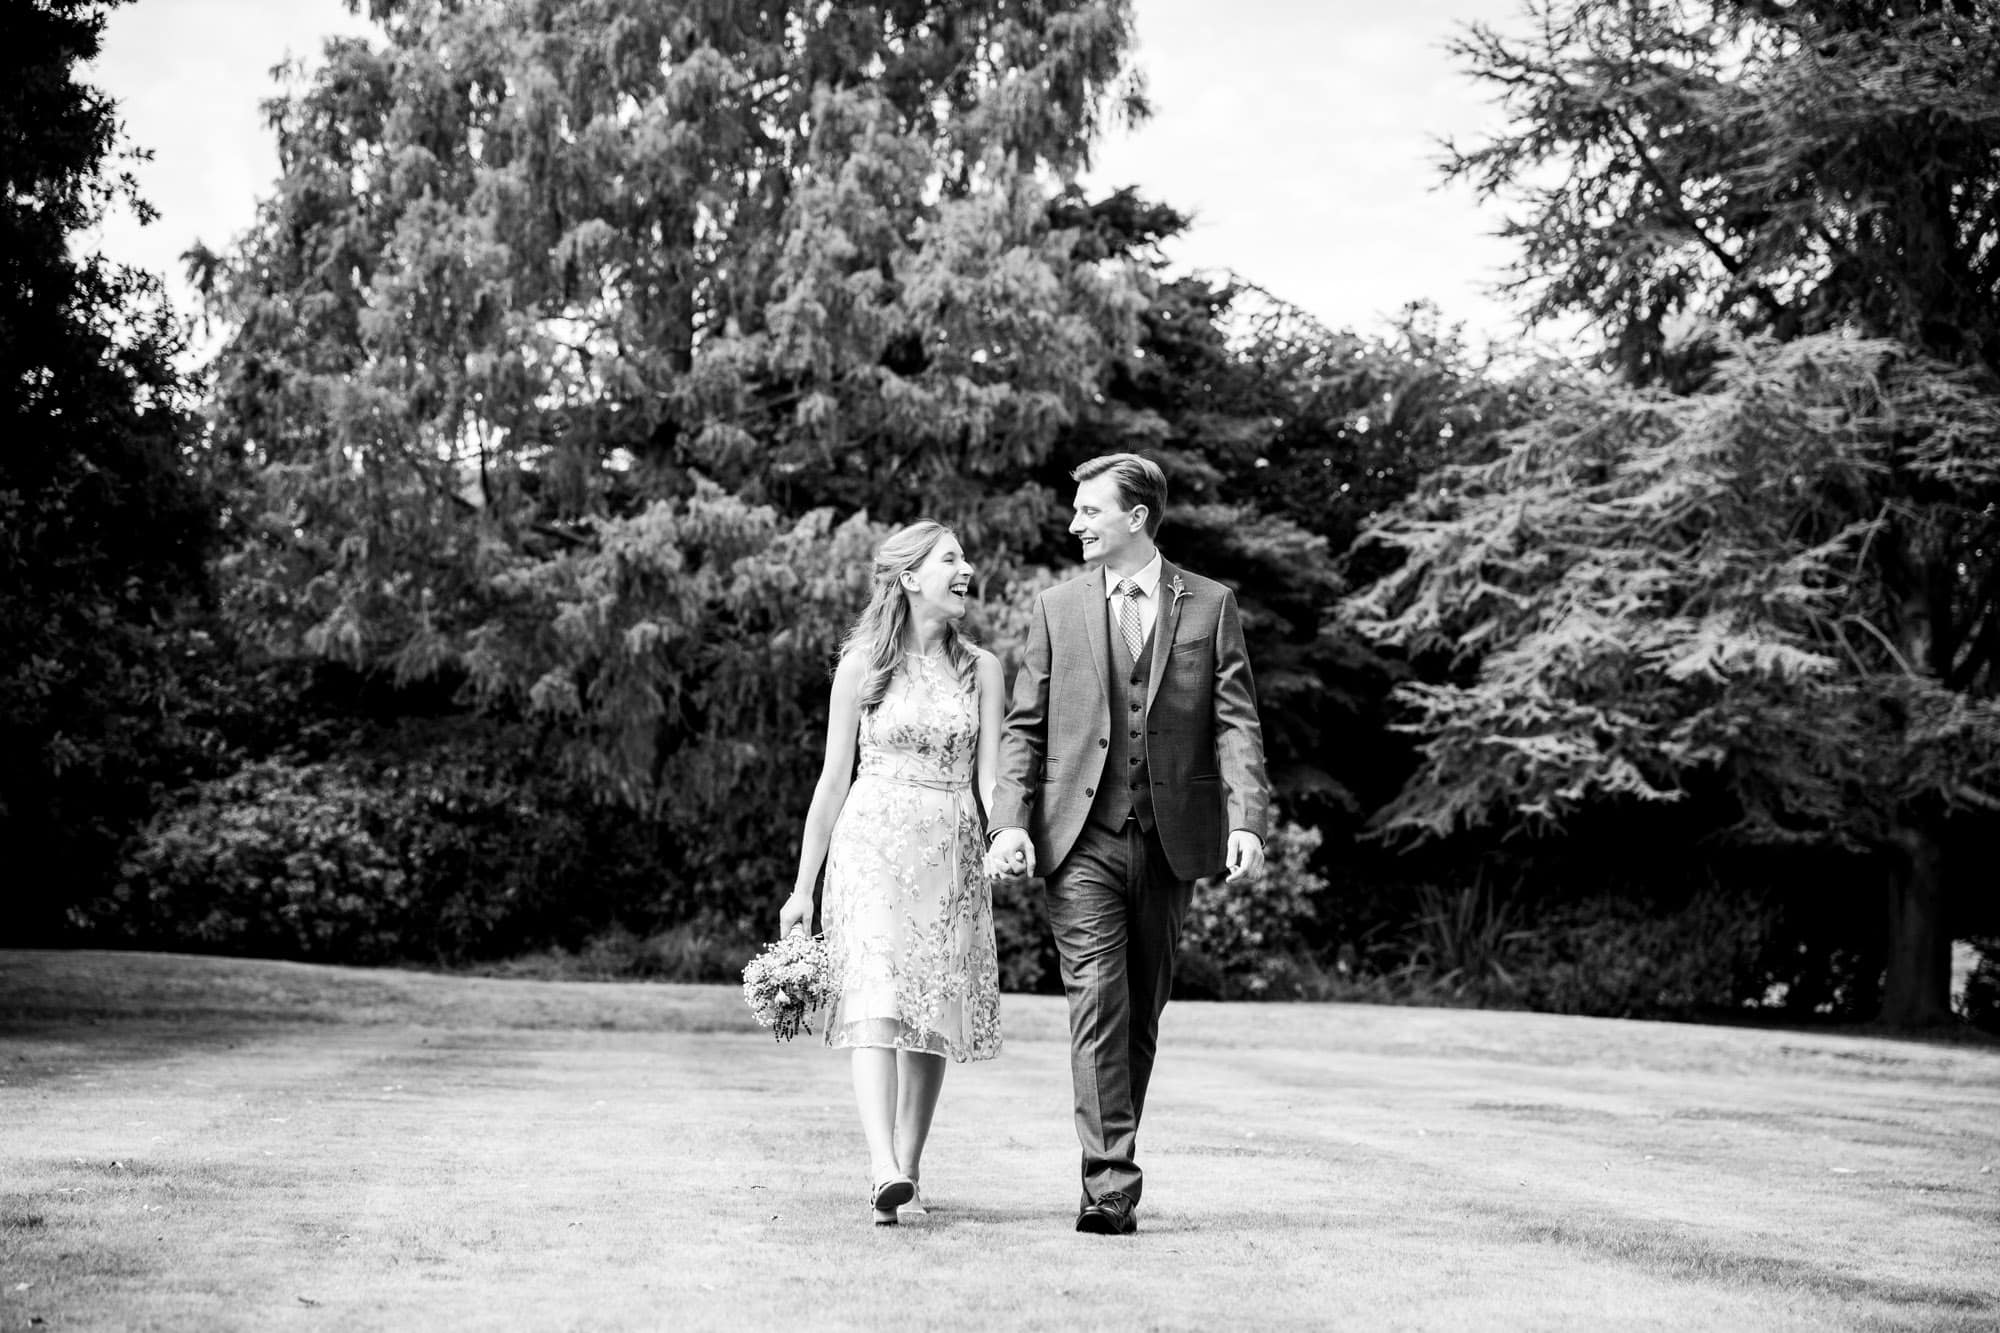 Married couple in black and white wedding photo taken by Bromley photographer at Oaks Farm Weddings venue